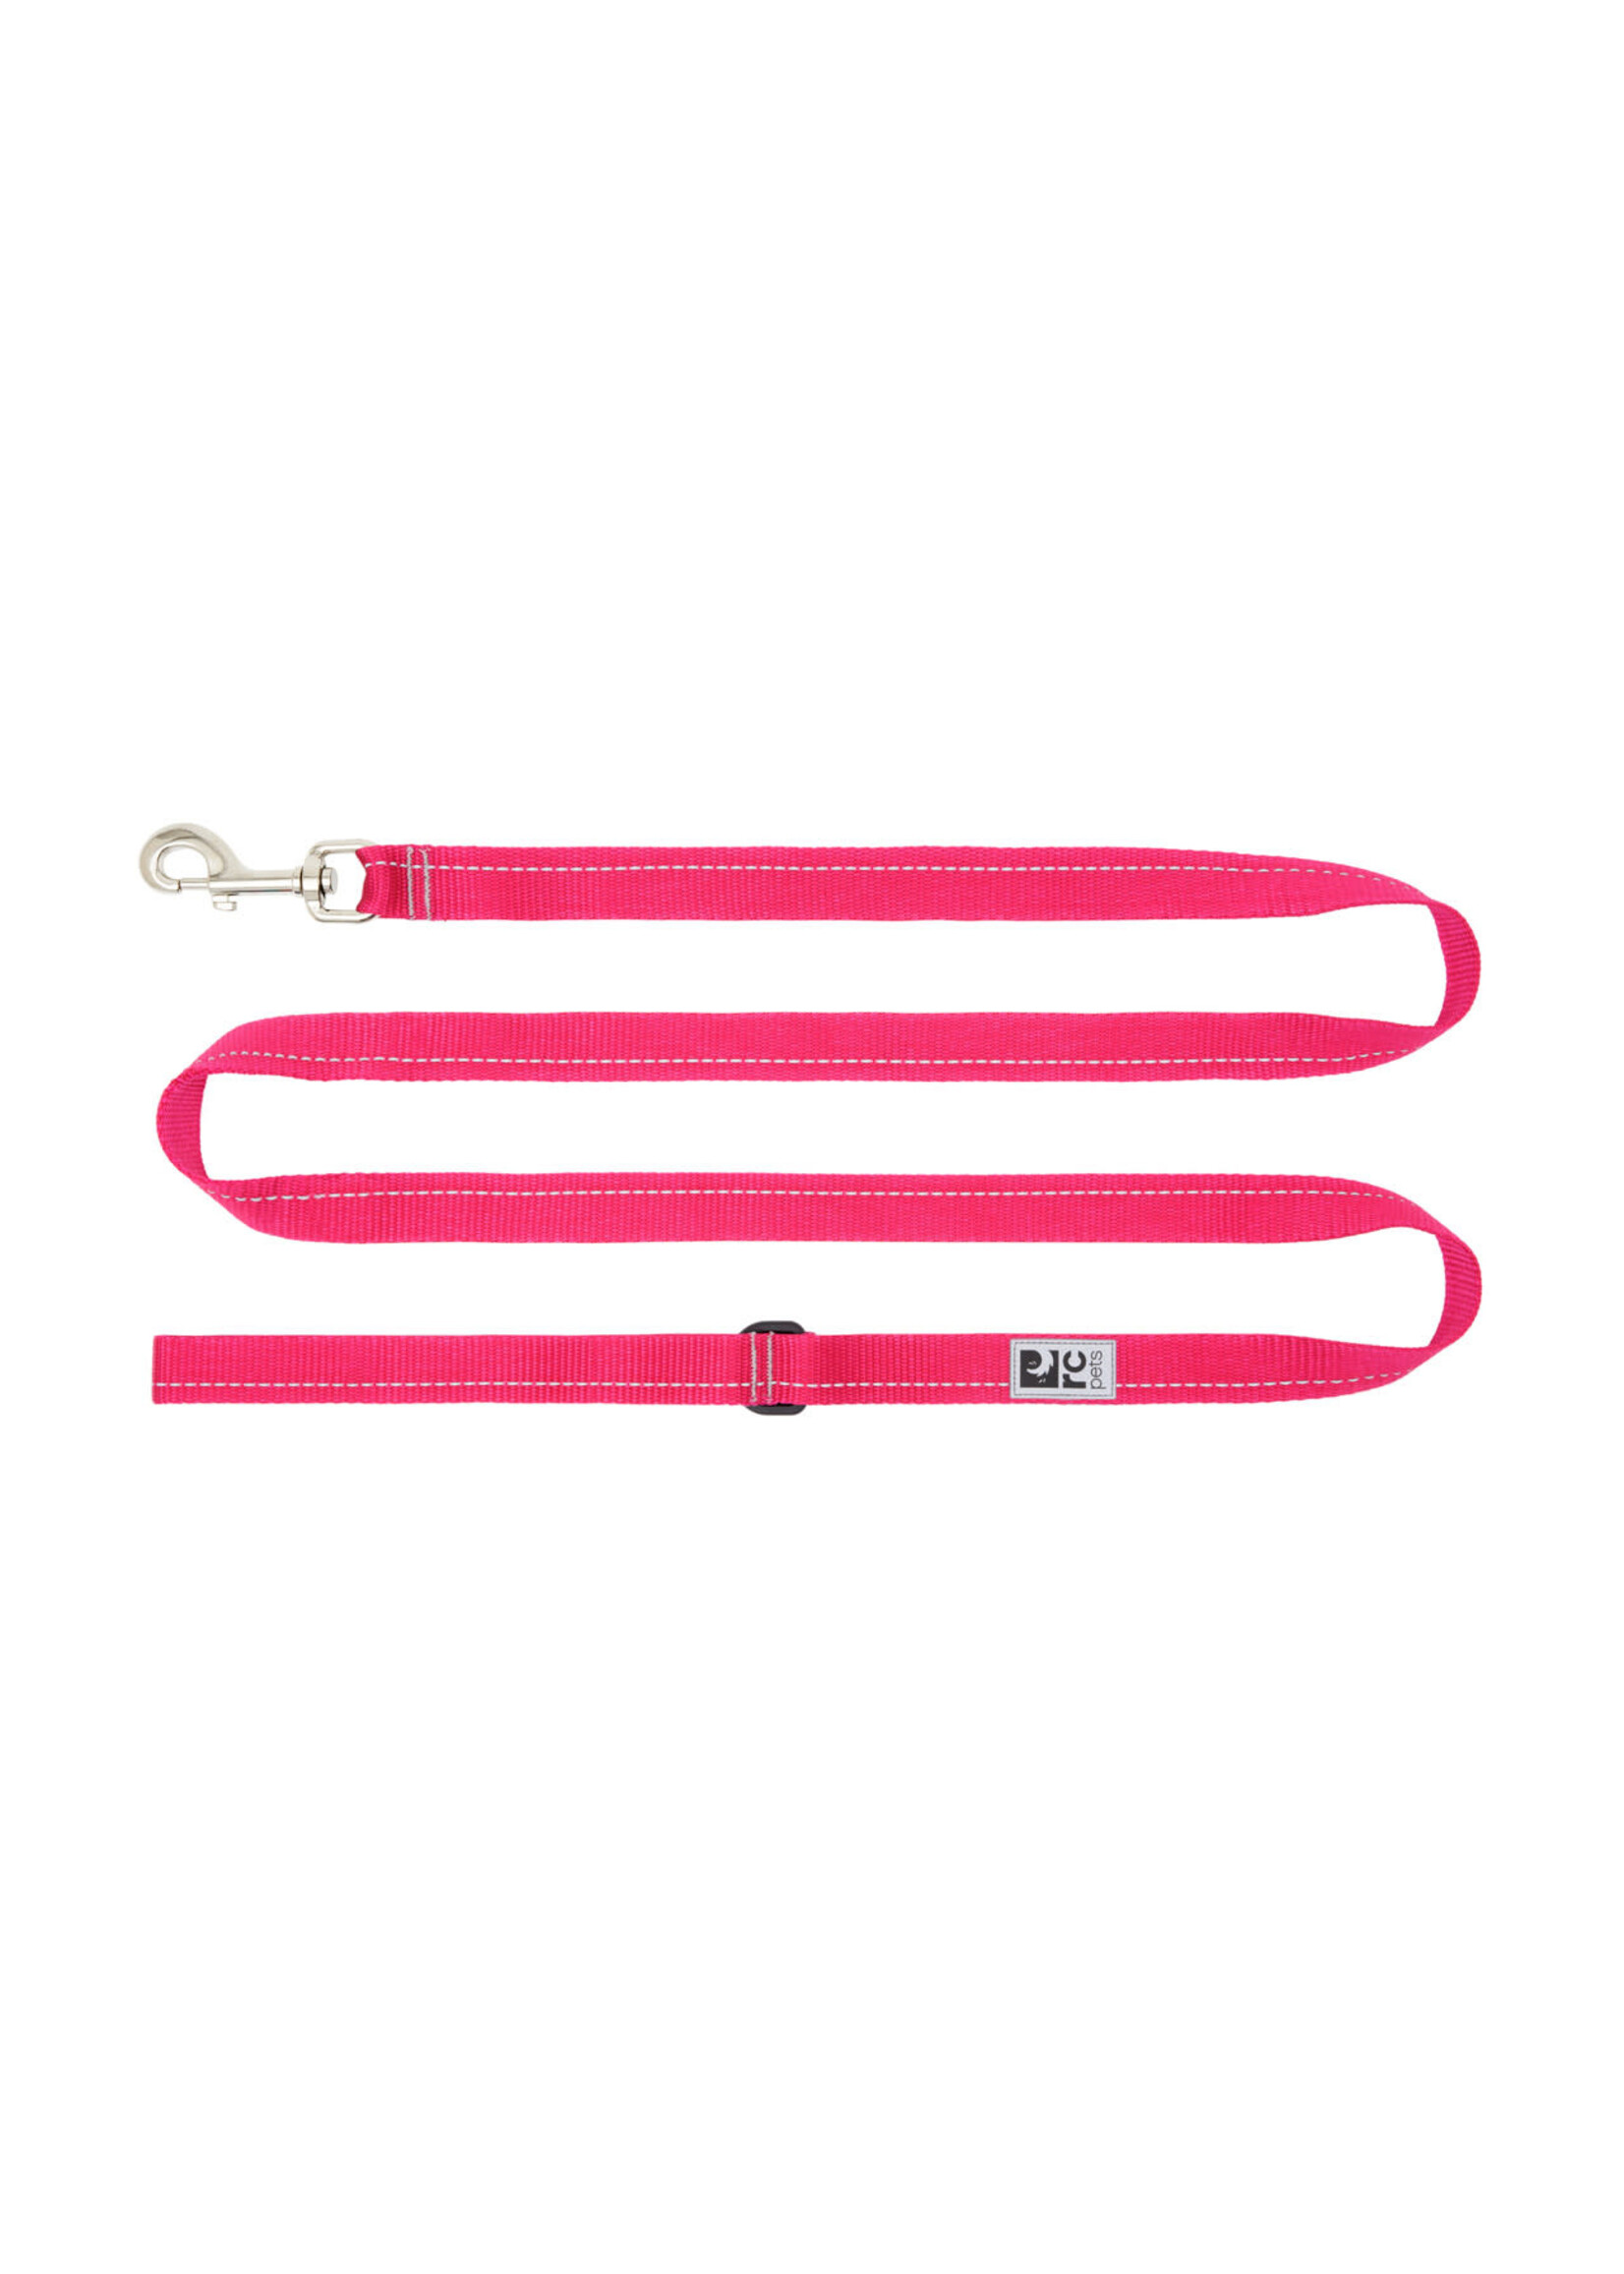 RC Pets Products RC Pets - Leash Primary 1"x6'